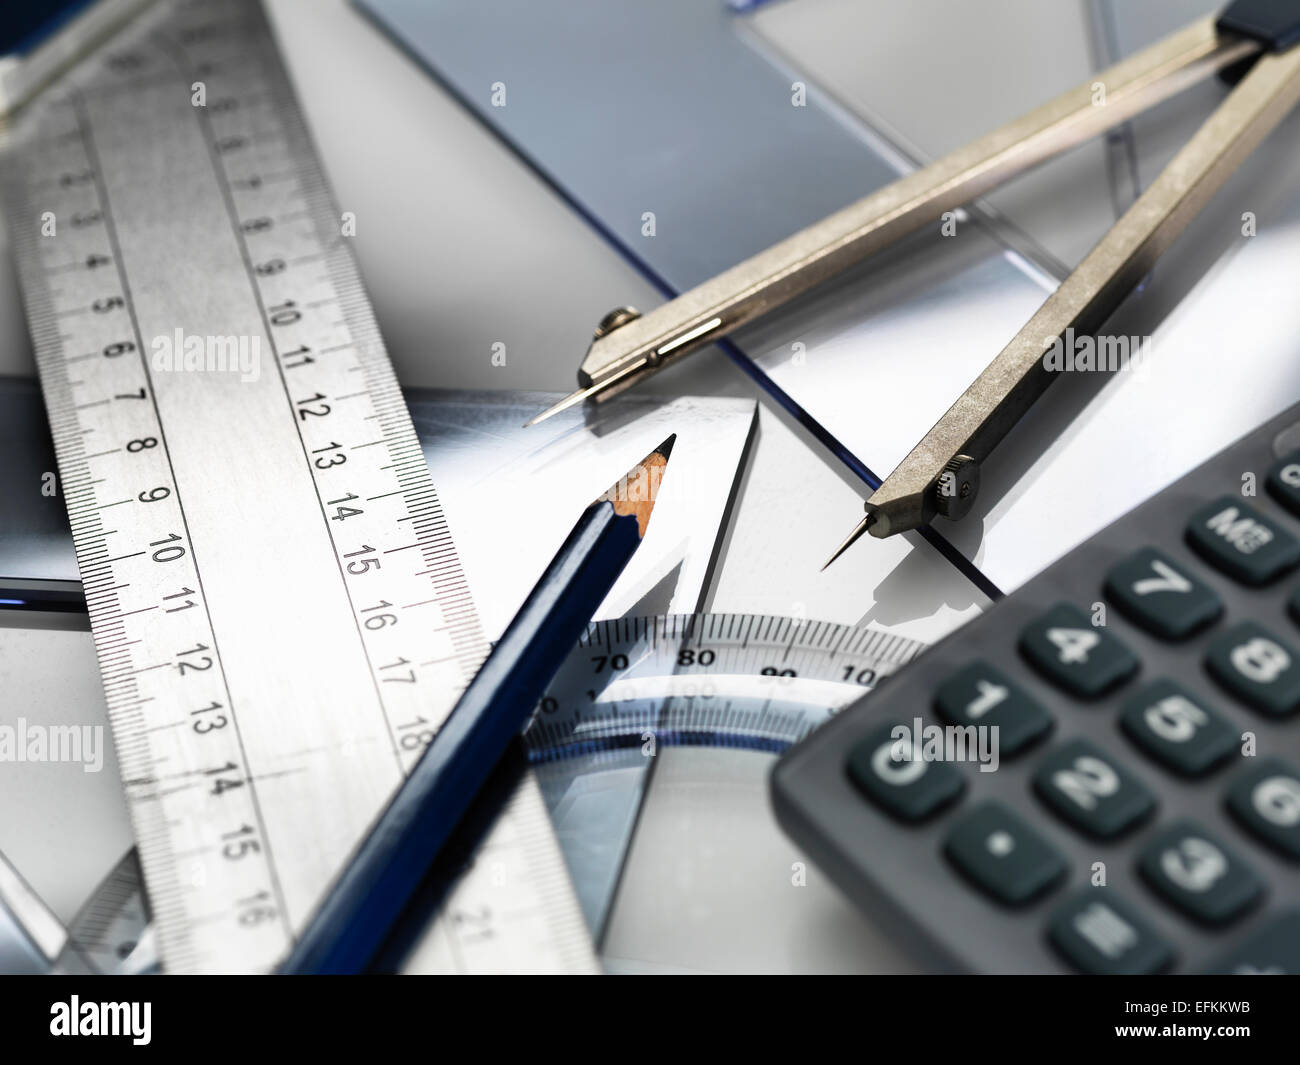 Drawing equipment, sitting on engineering technical drawing Stock Photo